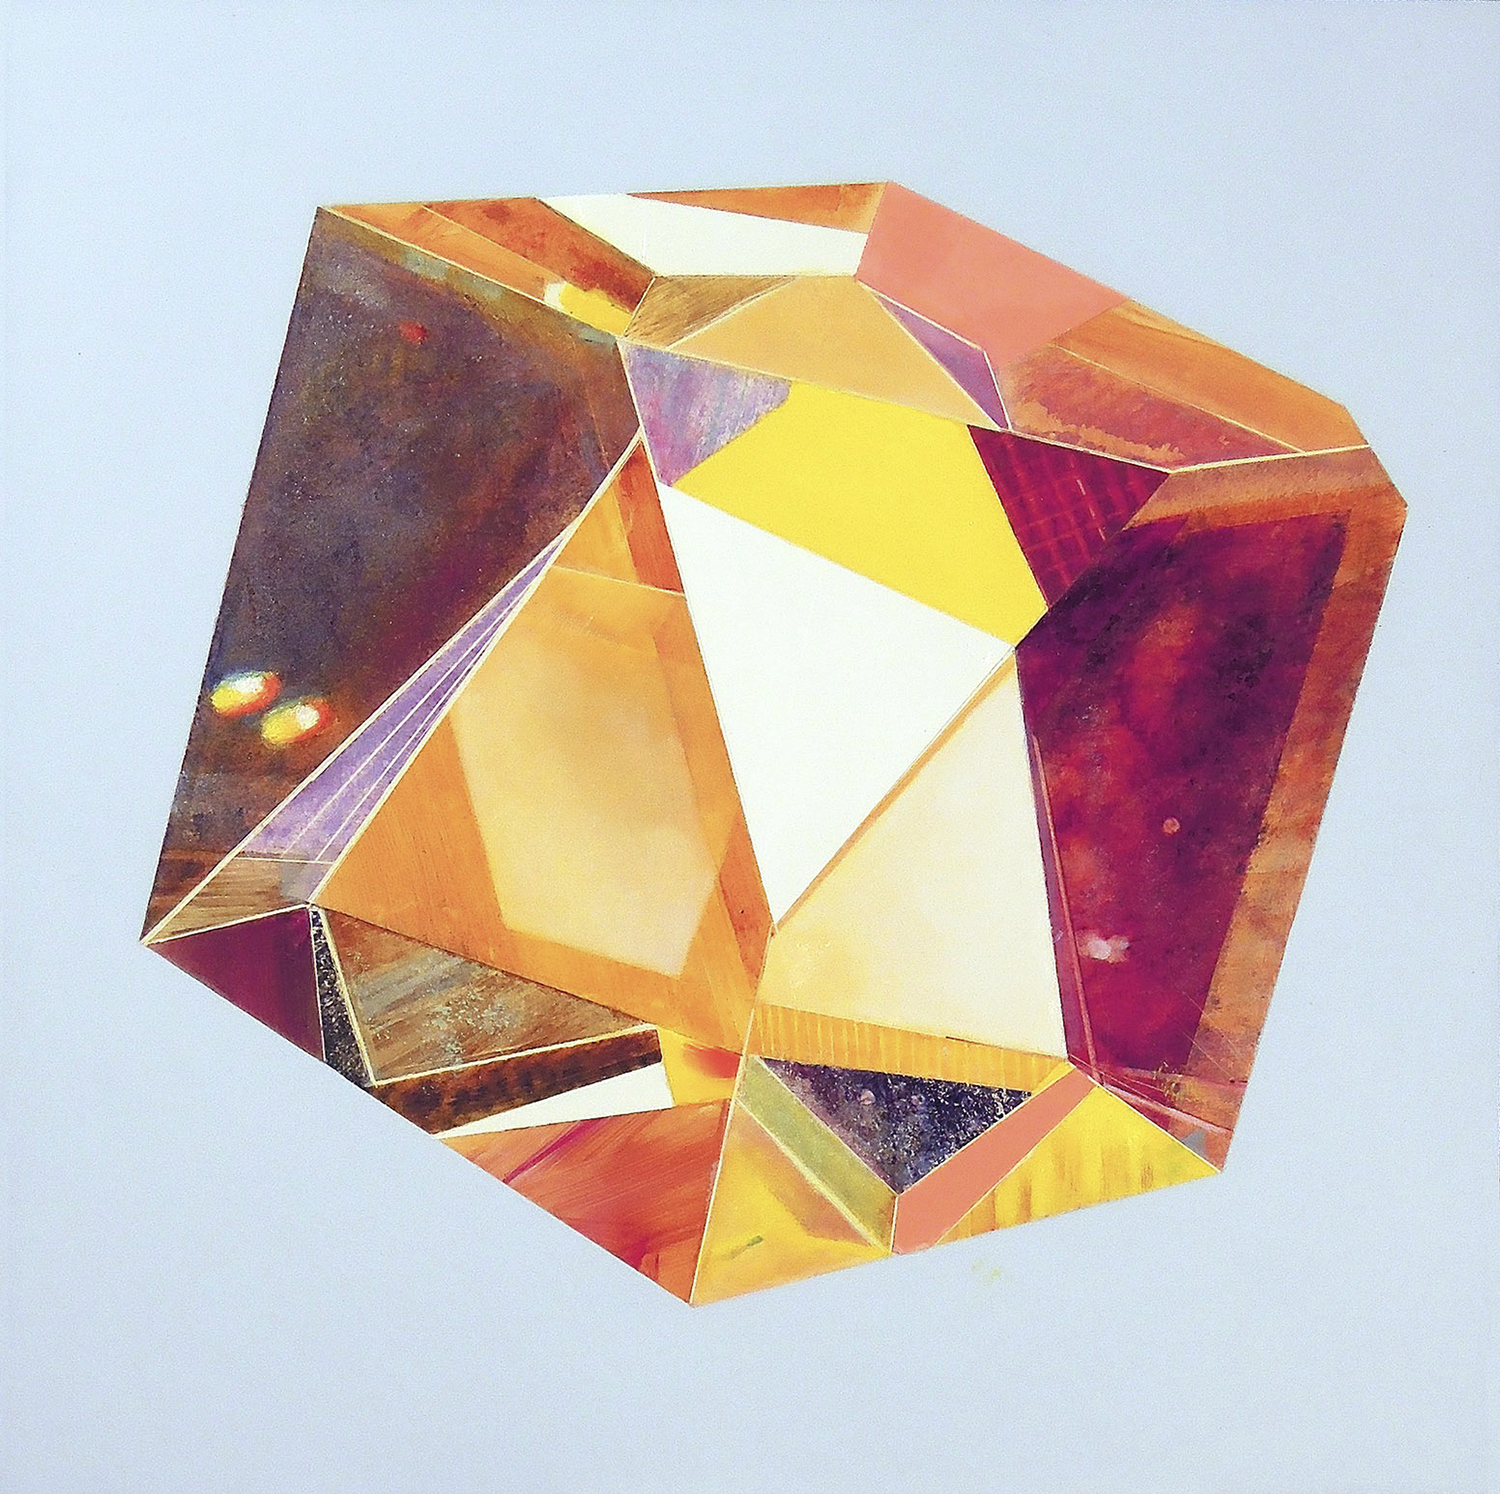   Calcite  oil and acrylic on clayboard 12"x12"&nbsp;2014 